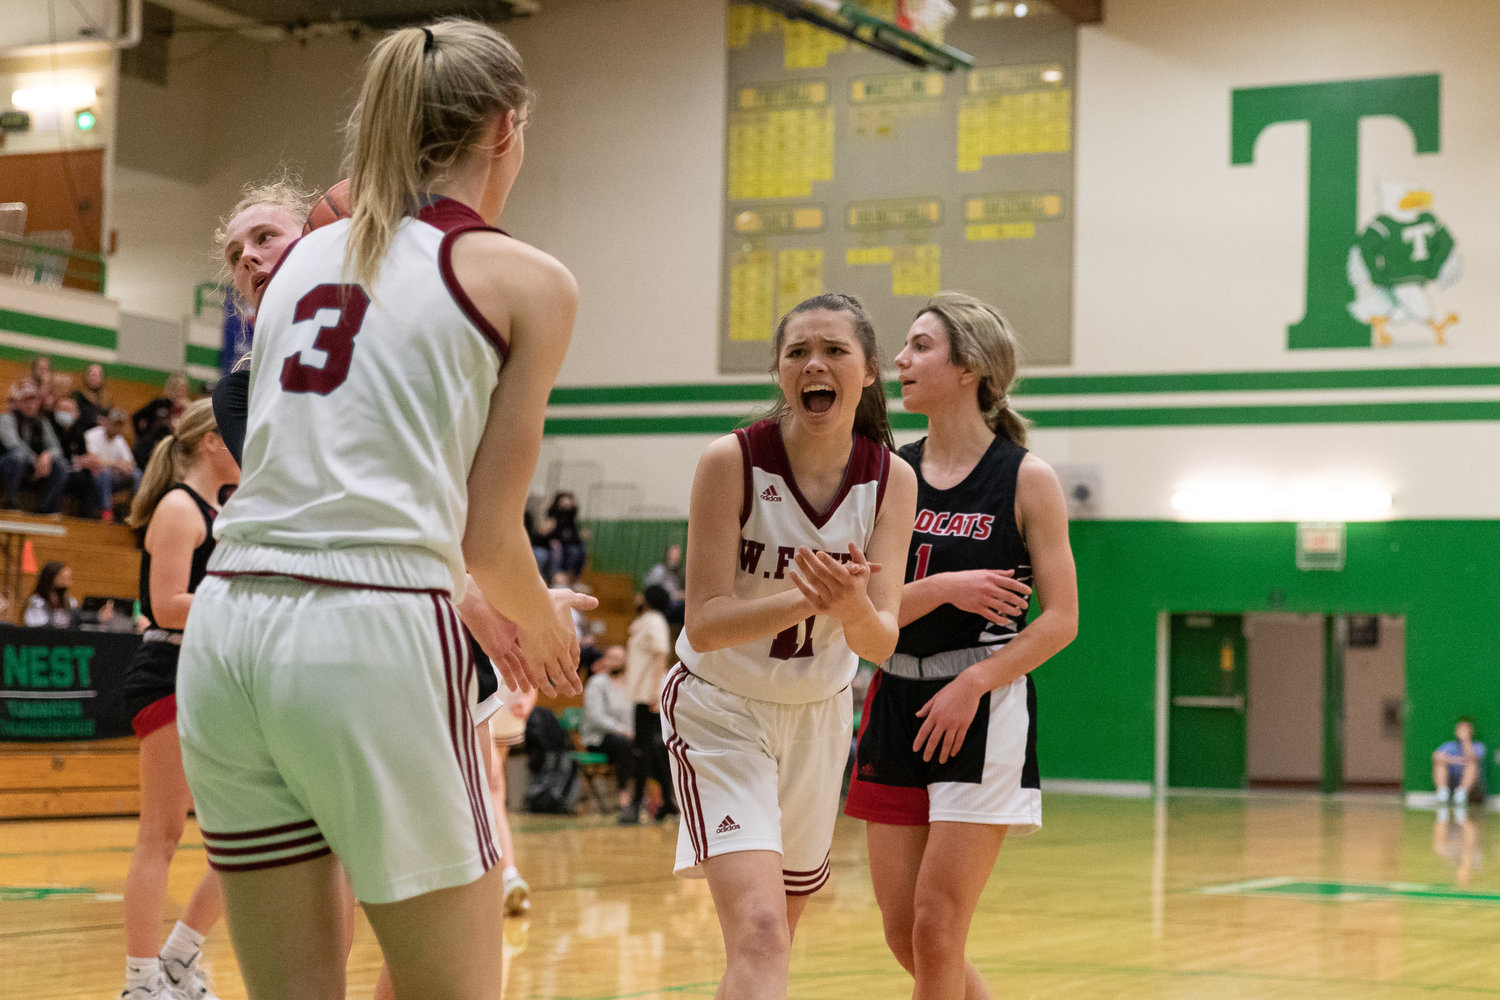 W.F. West's Olivia Remund celebrates Lexi Roberts' and-one against Archbishop Murphy in the regional round of the state tournament at Tumwater Feb. 25.